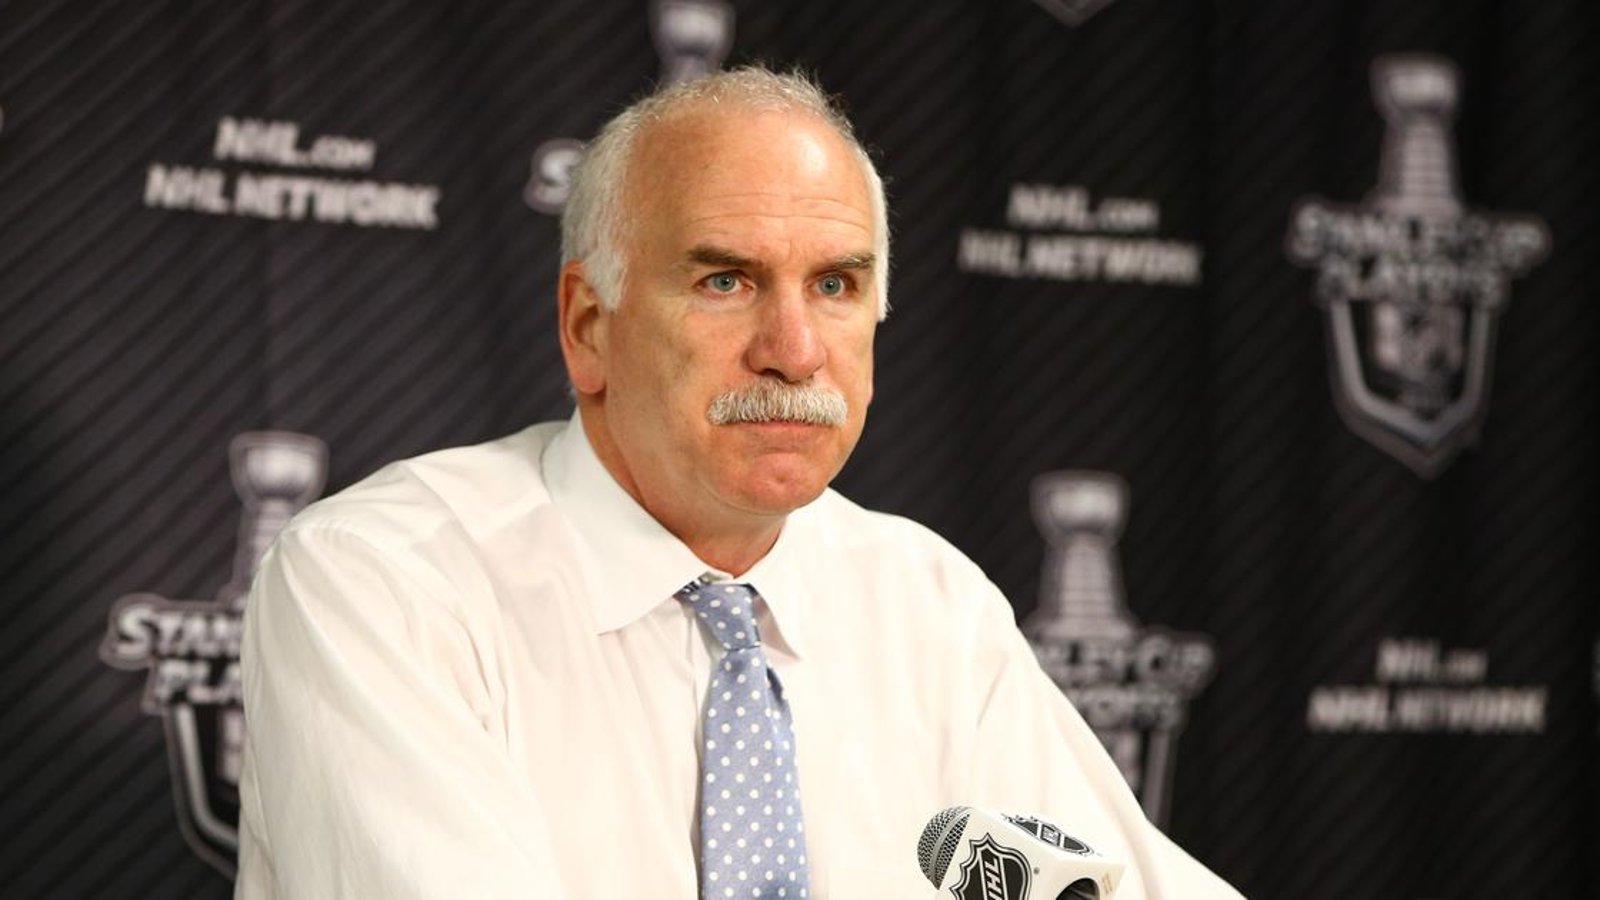 Coach Q. reacts to Bickell's retirement. 